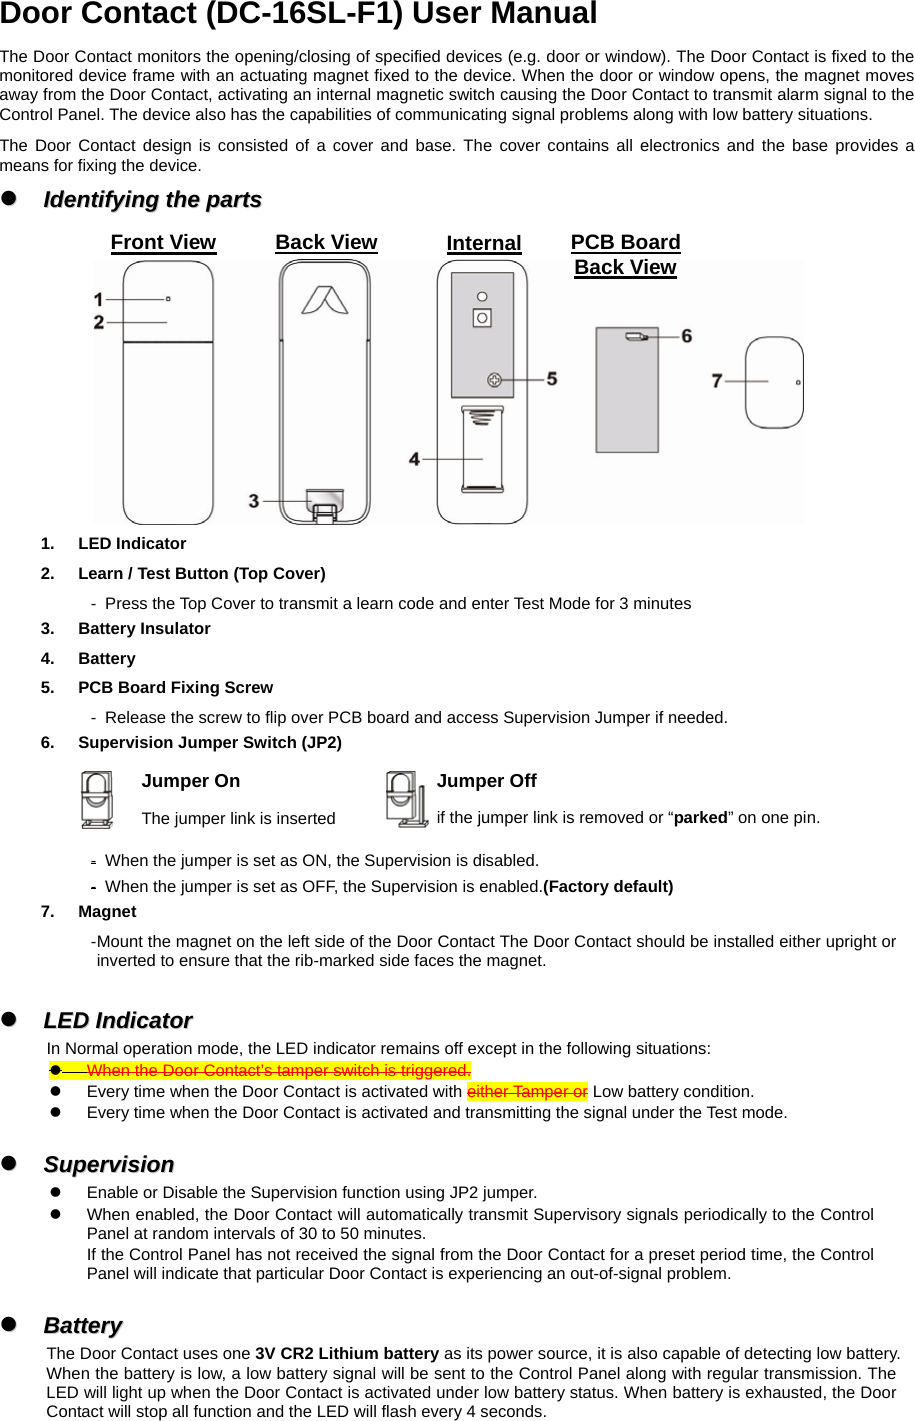 Door Contact (DC-16SL-F1) User Manual The Door Contact monitors the opening/closing of specified devices (e.g. door or window). The Door Contact is fixed to the monitored device frame with an actuating magnet fixed to the device. When the door or window opens, the magnet moves away from the Door Contact, activating an internal magnetic switch causing the Door Contact to transmit alarm signal to the Control Panel. The device also has the capabilities of communicating signal problems along with low battery situations. The Door Contact design is consisted of a cover and base. The cover contains all electronics and the base provides a means for fixing the device.   zz  IIddeennttiiffyyiinngg  tthhee  ppaarrttss      1. LED Indicator2.  Learn / Test Button (Top Cover) -   Press the Top Cover to transmit a learn code and enter Test Mode for 3 minutes 3. Battery Insulator 4. Battery 5.  PCB Board Fixing Screw   -   Release the screw to flip over PCB board and access Supervision Jumper if needed. 6.  Supervision Jumper Switch (JP2)    -   When the jumper is set as ON, the Supervision is disabled.   -   When the jumper is set as OFF, the Supervision is enabled.(Factory default)   7. Magnet - Mount the magnet on the left side of the Door Contact The Door Contact should be installed either upright or inverted to ensure that the rib-marked side faces the magnet.  zz  LLEEDD  IInnddiiccaattoorr      In Normal operation mode, the LED indicator remains off except in the following situations: z When the Door Contact’s tamper switch is triggered. z  Every time when the Door Contact is activated with either Tamper or Low battery condition. z  Every time when the Door Contact is activated and transmitting the signal under the Test mode.  zz  SSuuppeerrvviissiioonn      z  Enable or Disable the Supervision function using JP2 jumper. z  When enabled, the Door Contact will automatically transmit Supervisory signals periodically to the Control Panel at random intervals of 30 to 50 minutes. If the Control Panel has not received the signal from the Door Contact for a preset period time, the Control Panel will indicate that particular Door Contact is experiencing an out-of-signal problem.  zz  BBaatttteerryy  The Door Contact uses one 3V CR2 Lithium battery as its power source, it is also capable of detecting low battery. When the battery is low, a low battery signal will be sent to the Control Panel along with regular transmission. The LED will light up when the Door Contact is activated under low battery status. When battery is exhausted, the Door Contact will stop all function and the LED will flash every 4 seconds. Jumper On The jumper link is inserted Jumper Off if the jumper link is removed or “parked” on one pin. Front View Back View Internal PCB BoardBack View 